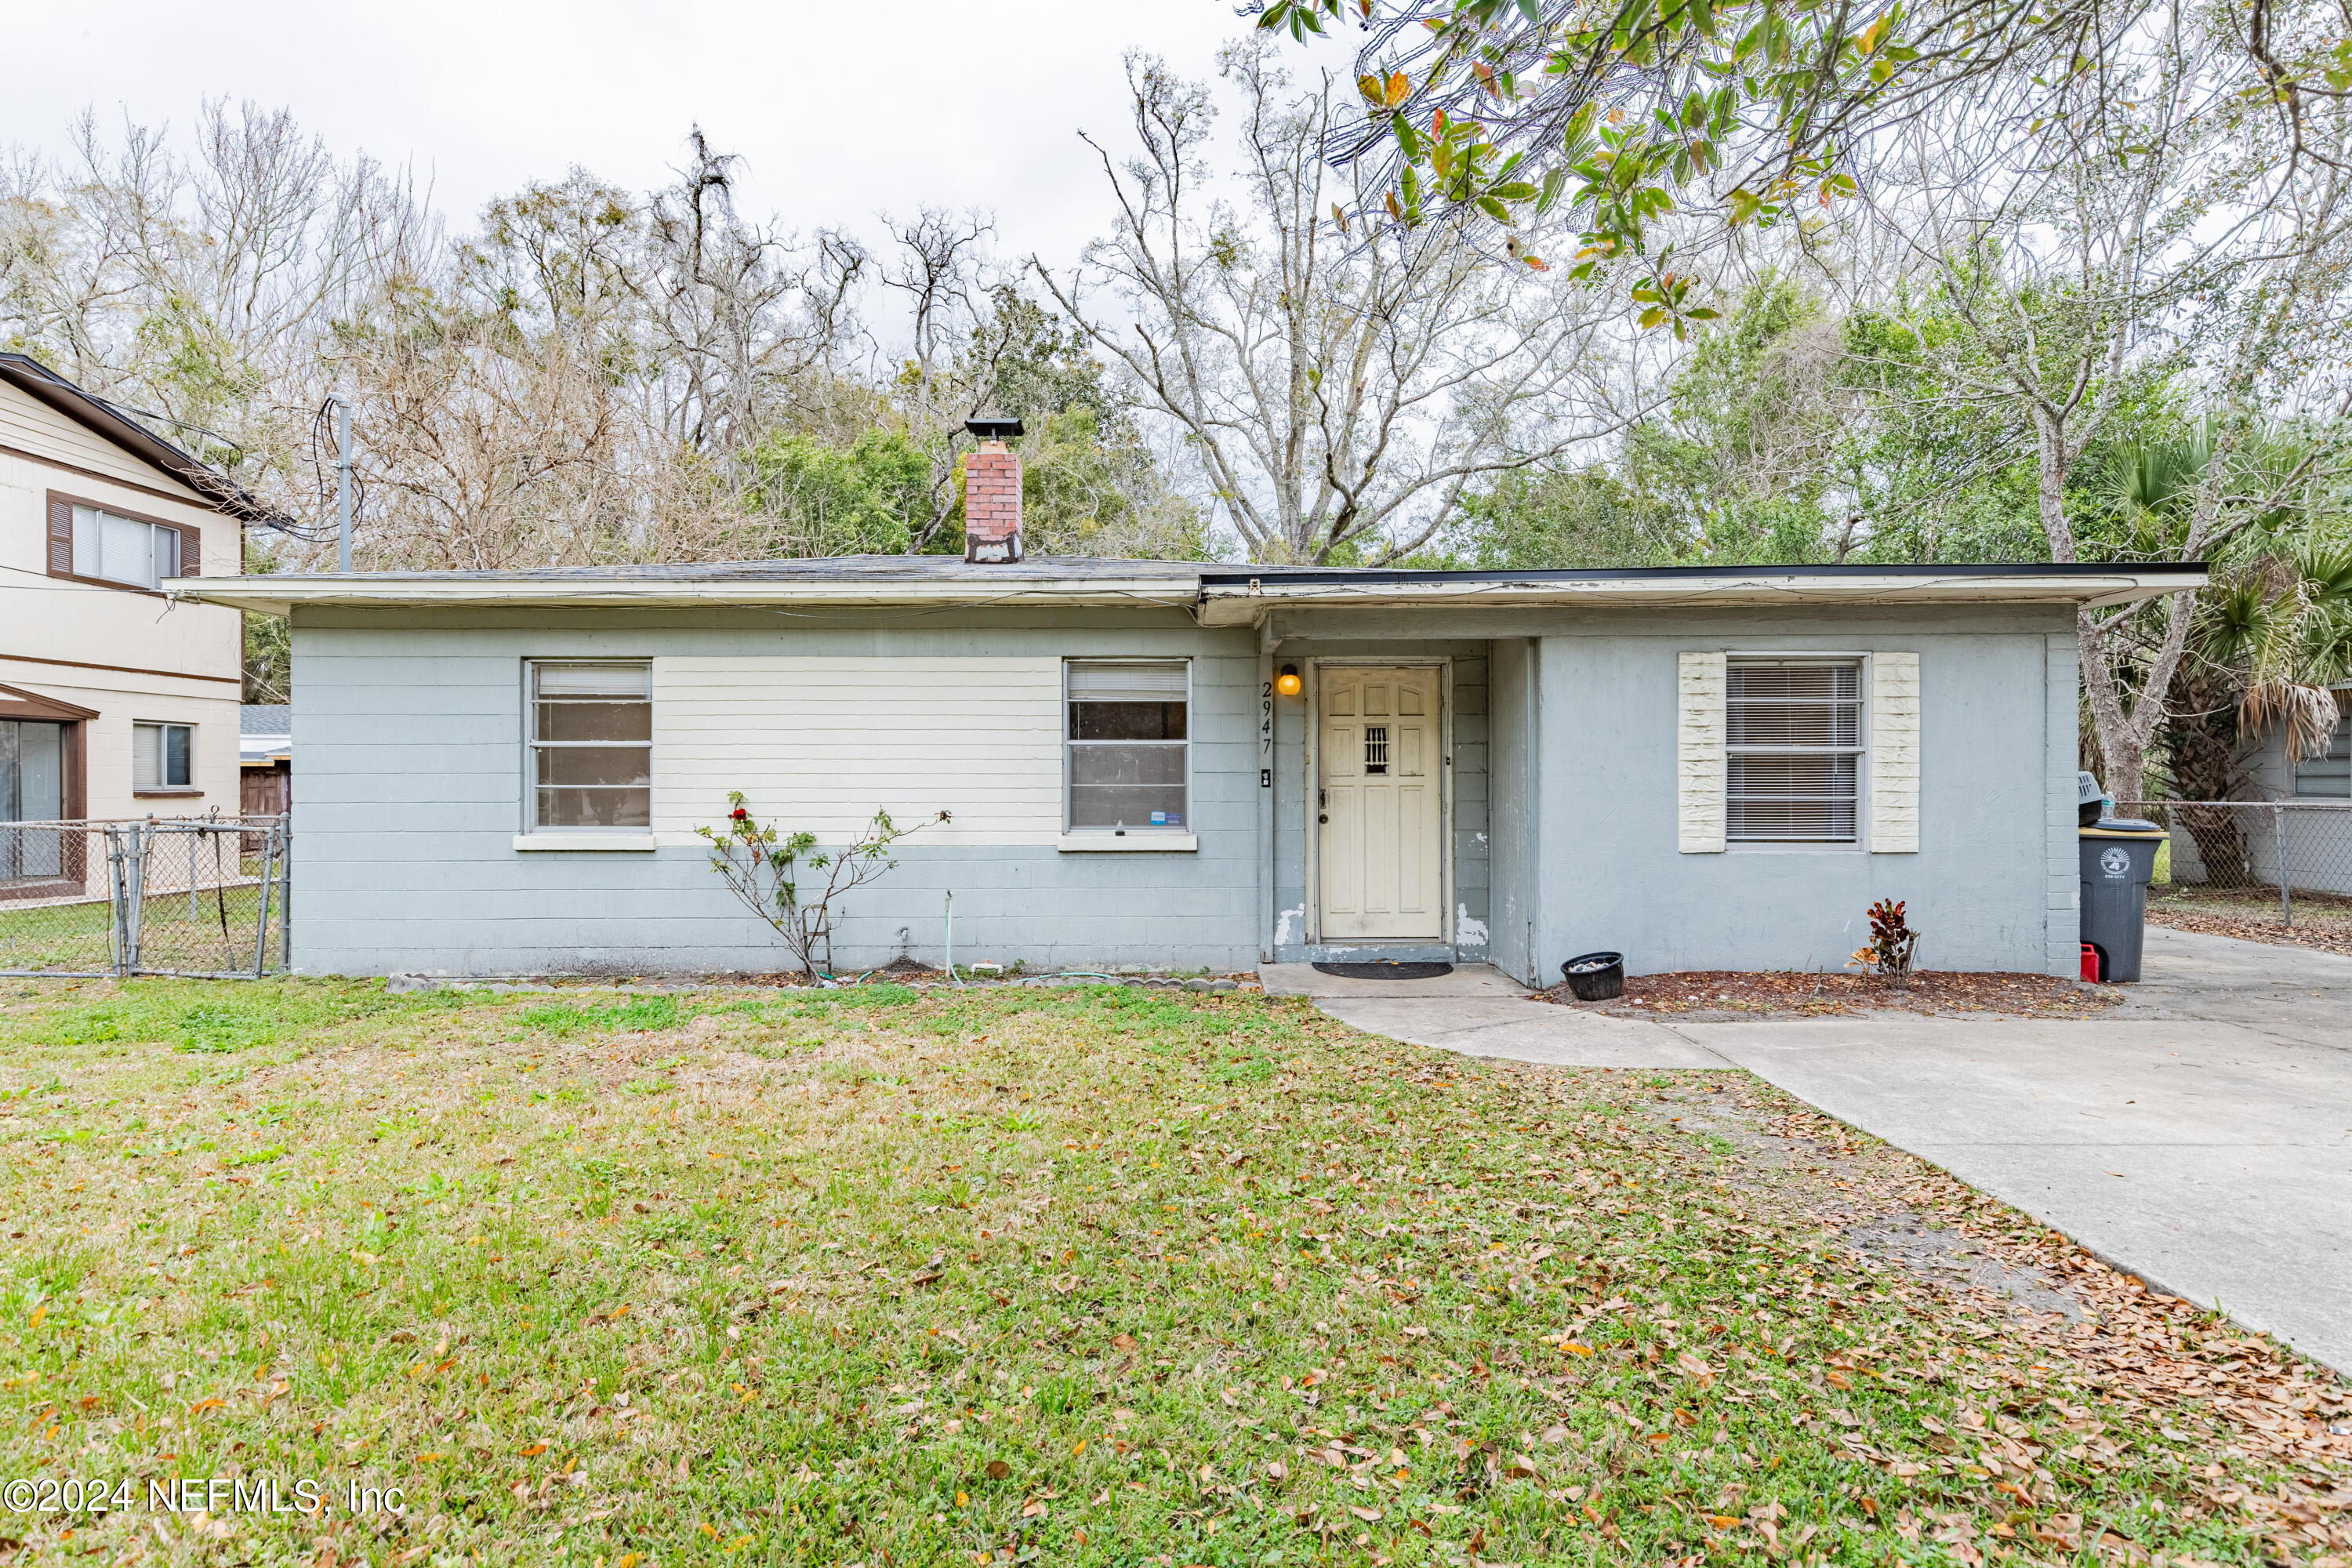 Jacksonville, FL home for sale located at 2947 W 12th Street, Jacksonville, FL 32254